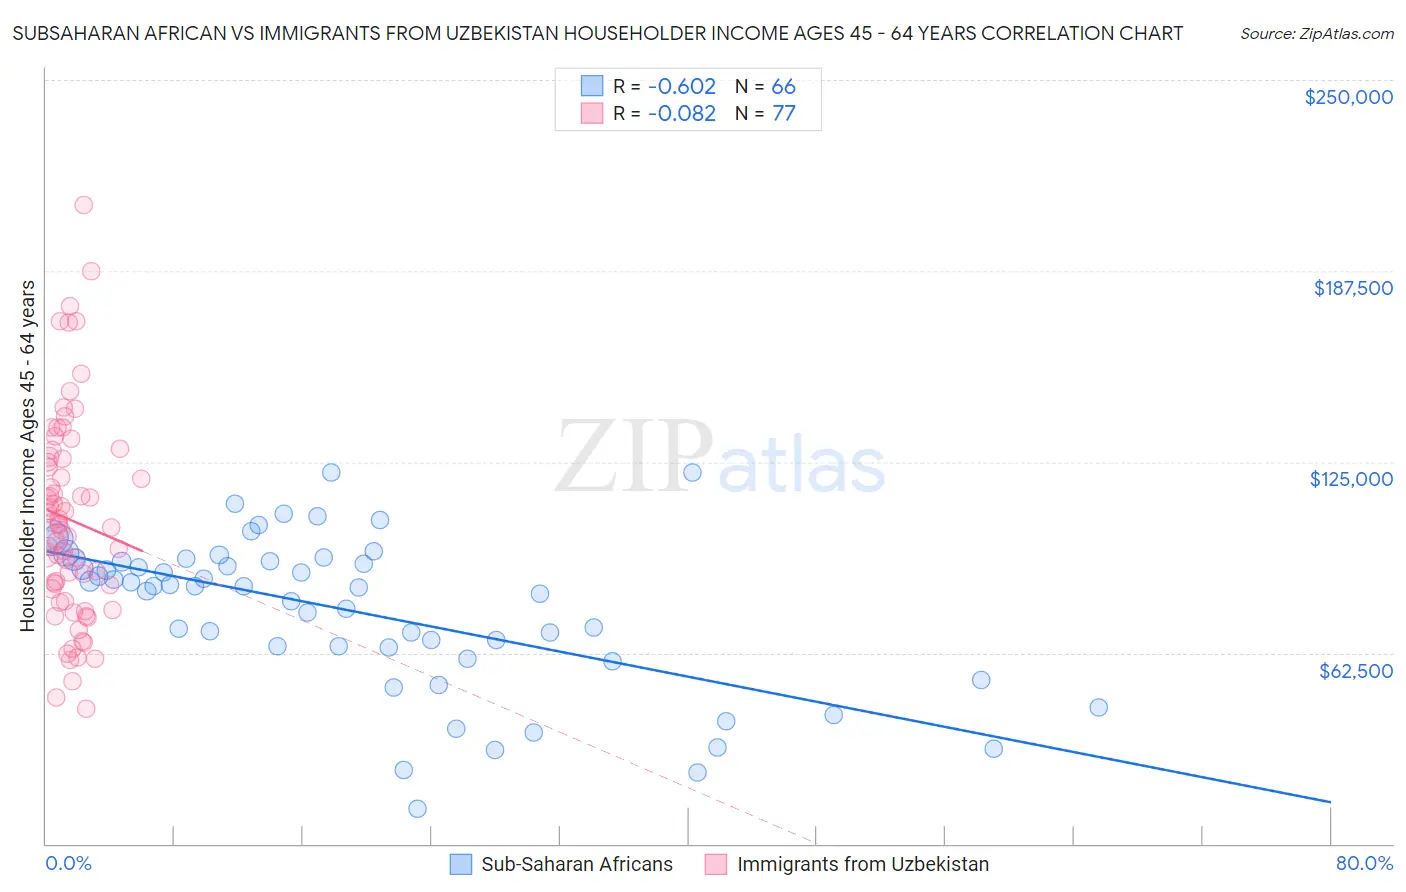 Subsaharan African vs Immigrants from Uzbekistan Householder Income Ages 45 - 64 years